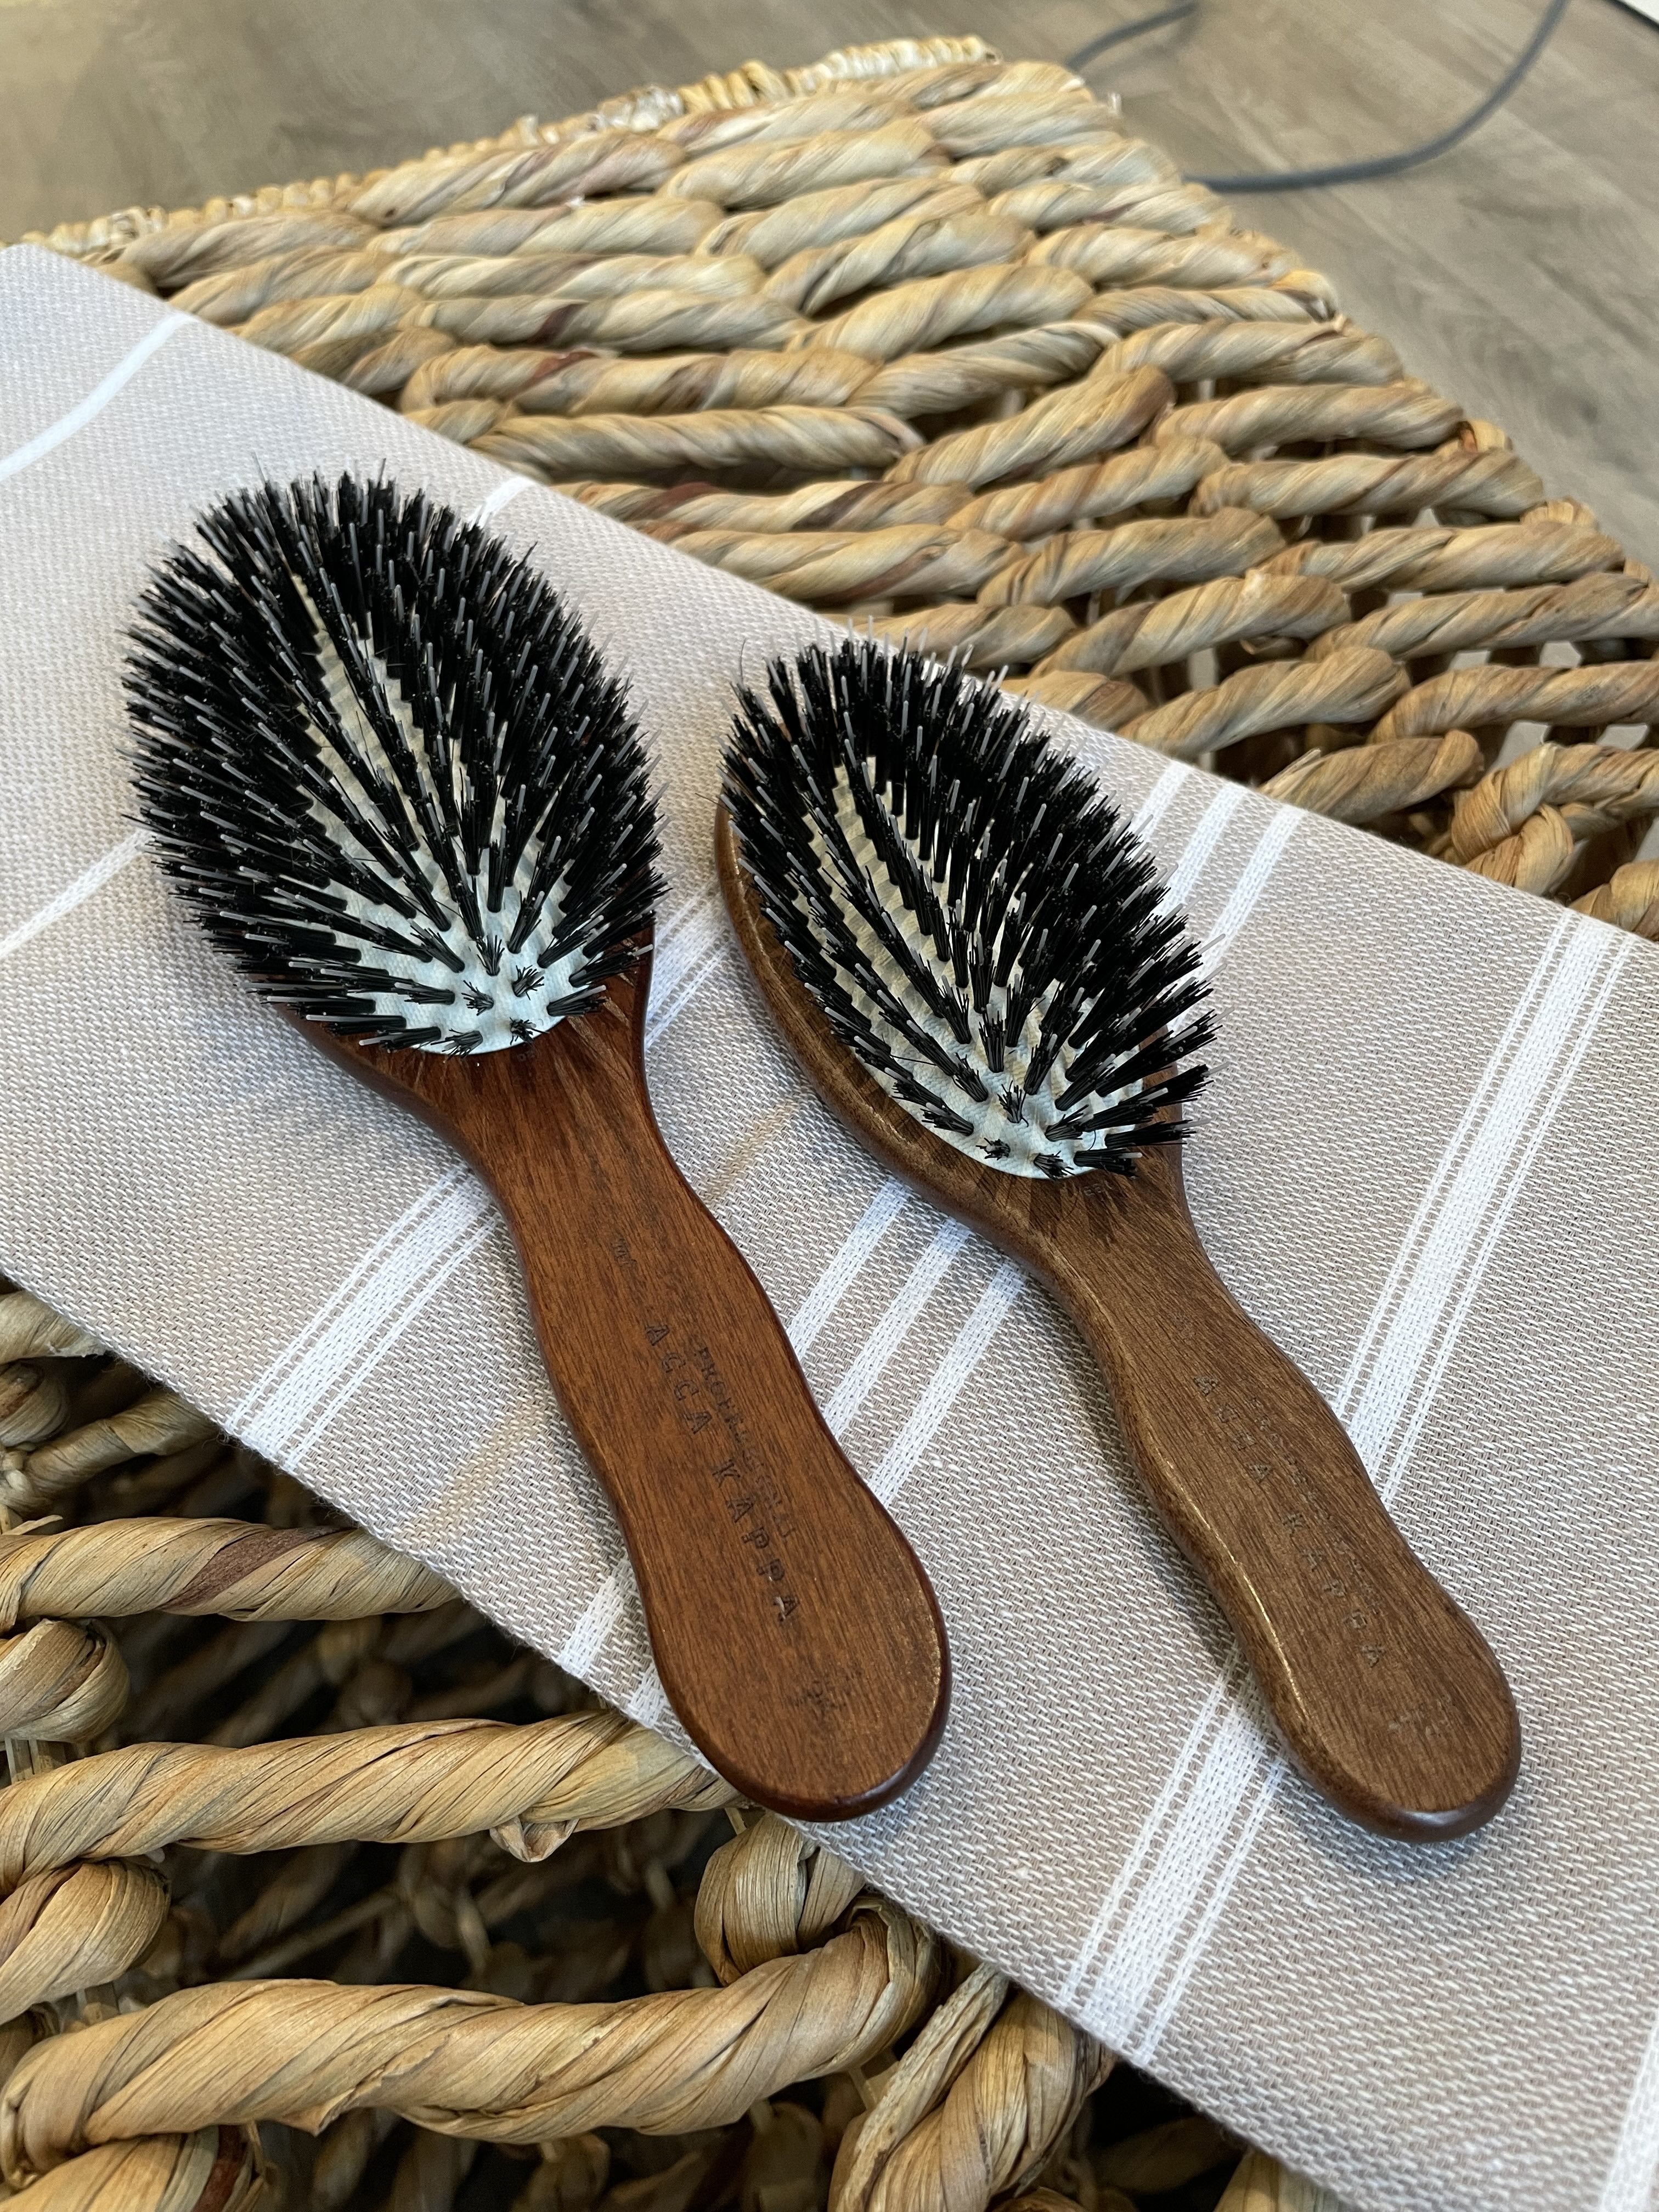 Acca Kappa boar bristle hairbrushes in two sizes, regular and travel, for healthy hair.